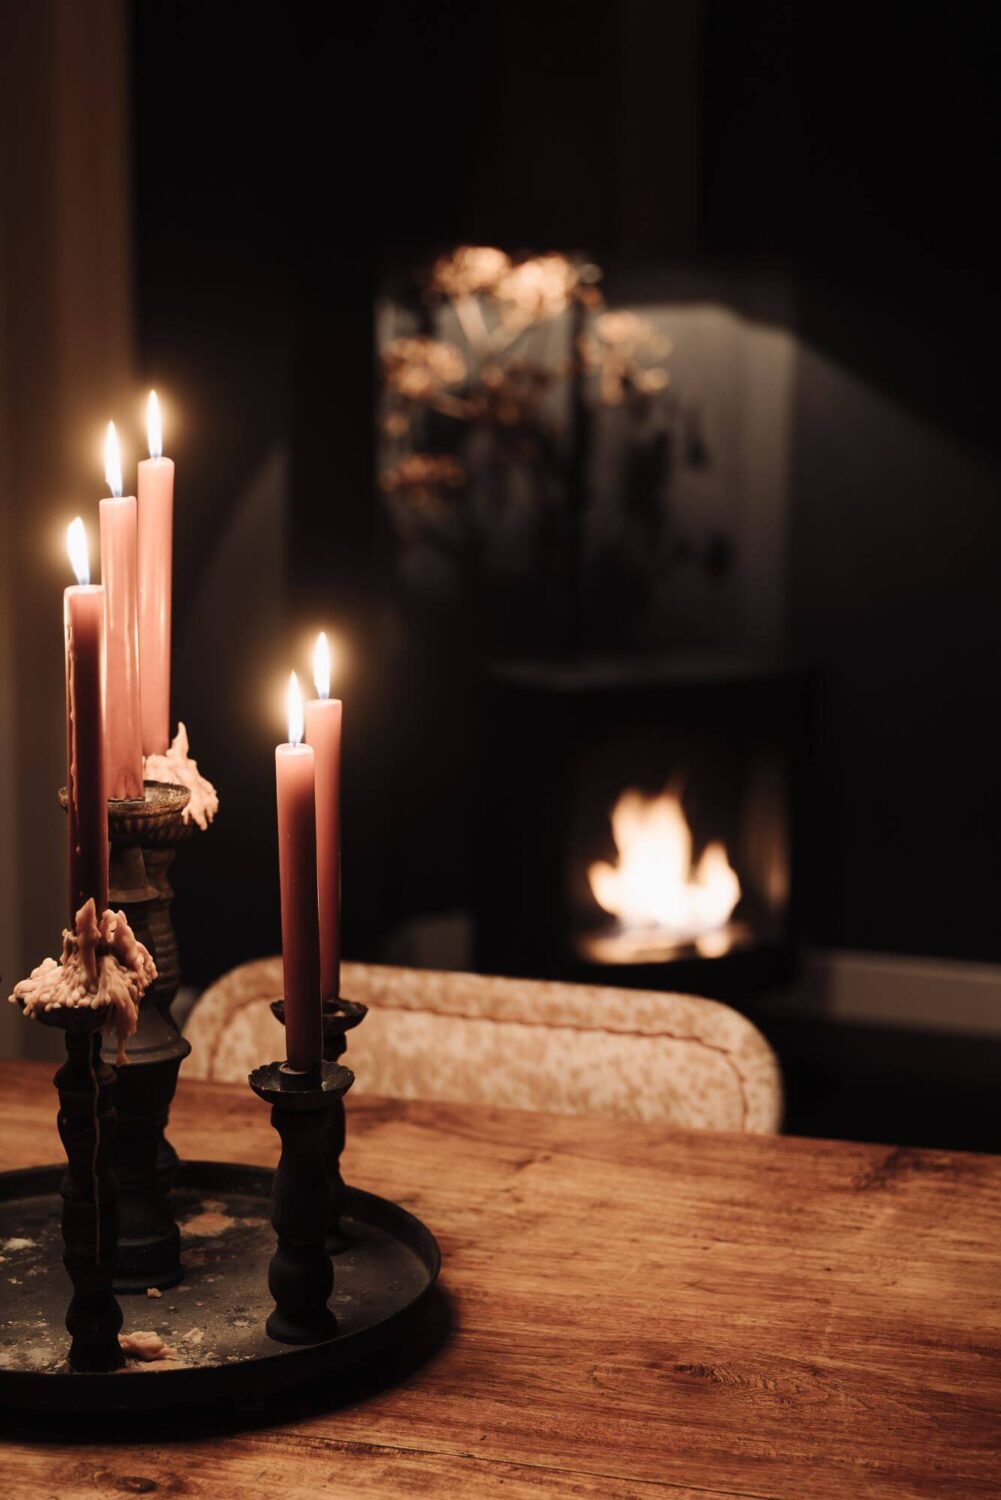 hygge-dining-table-candles-townhouse-netherlands-nordroom